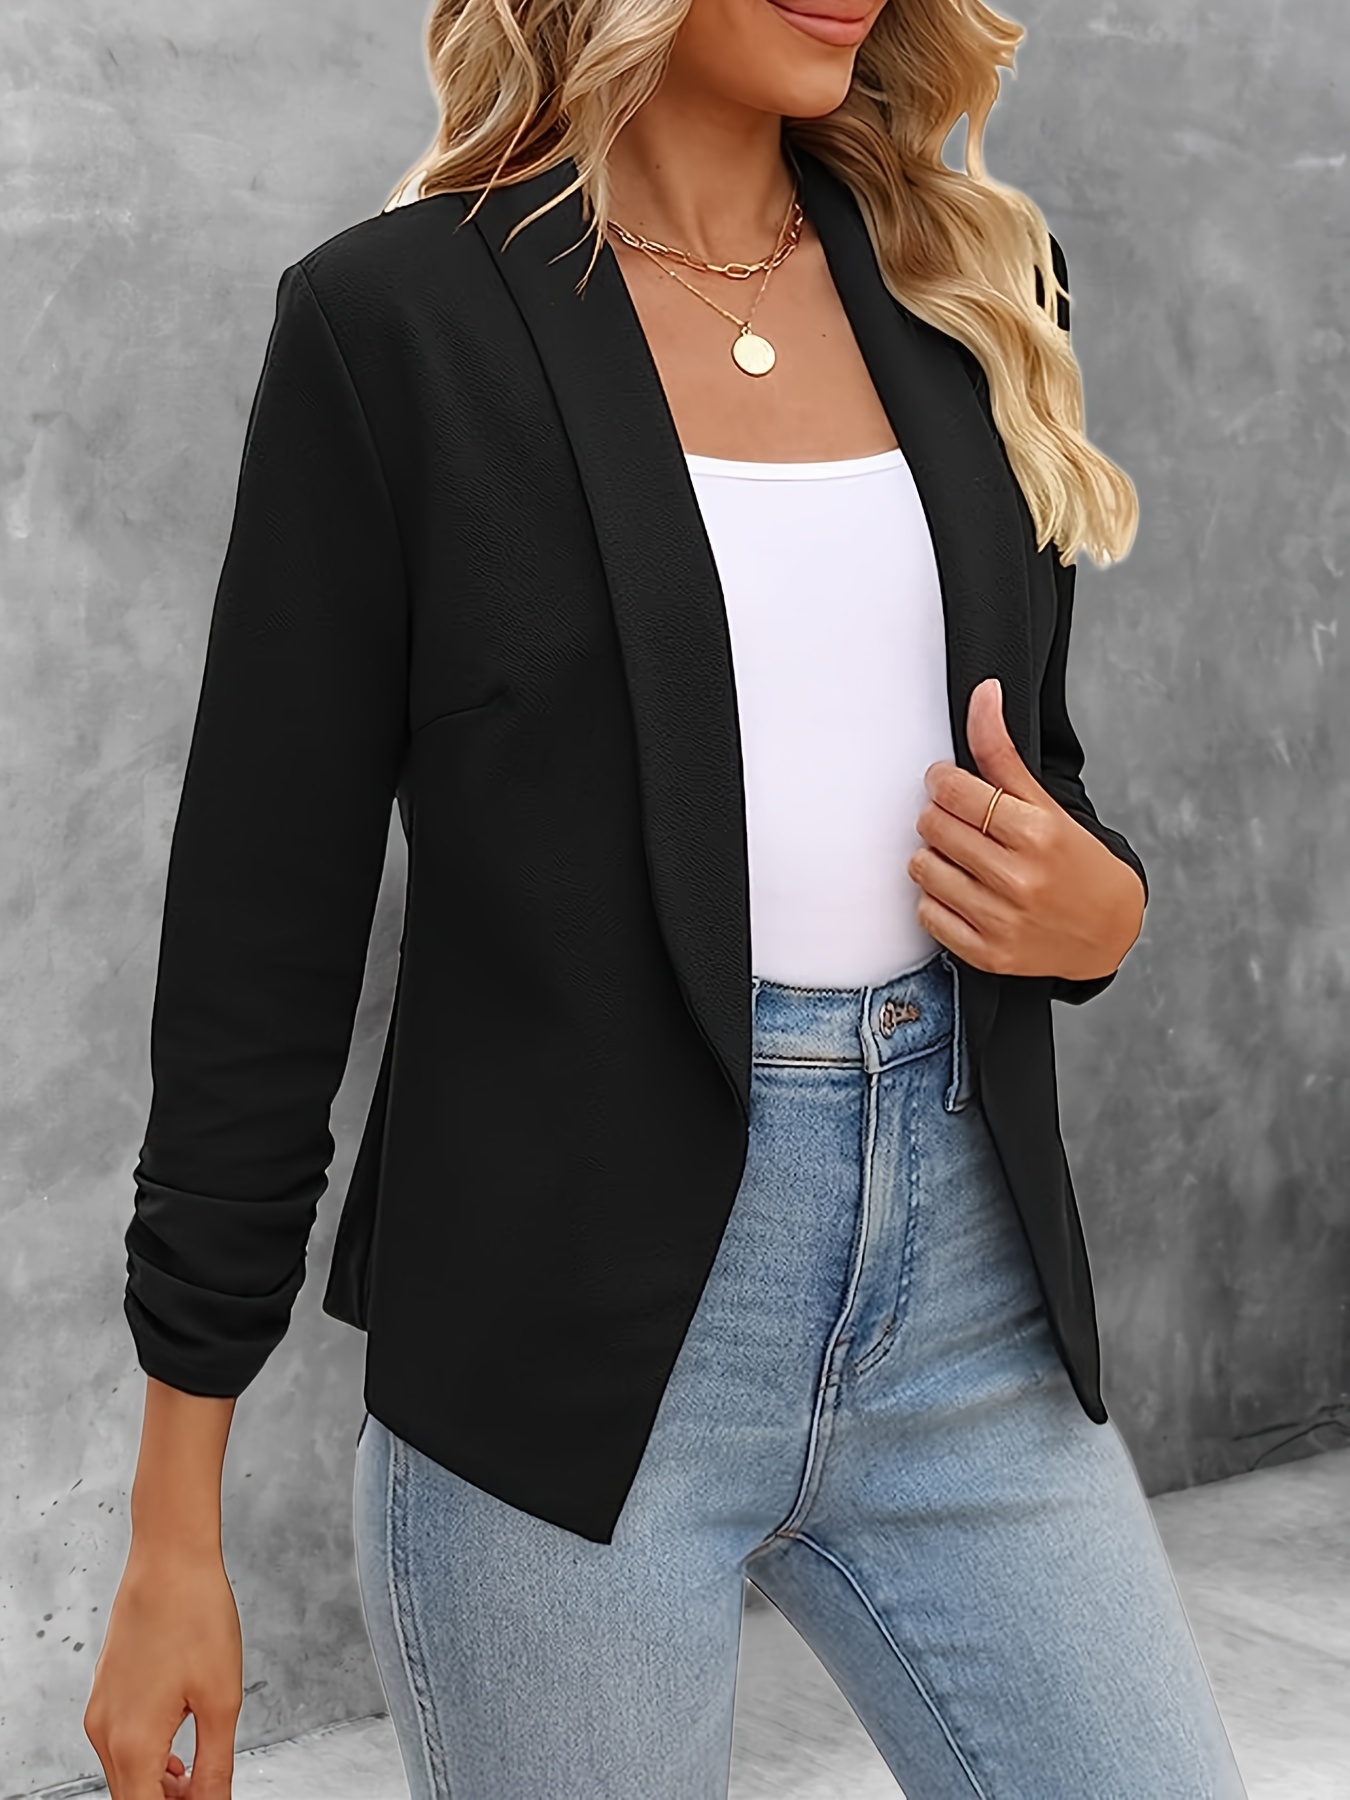 solid color open front blazer elegant lapel ruched sleeve blazer for office work womens clothing details 28